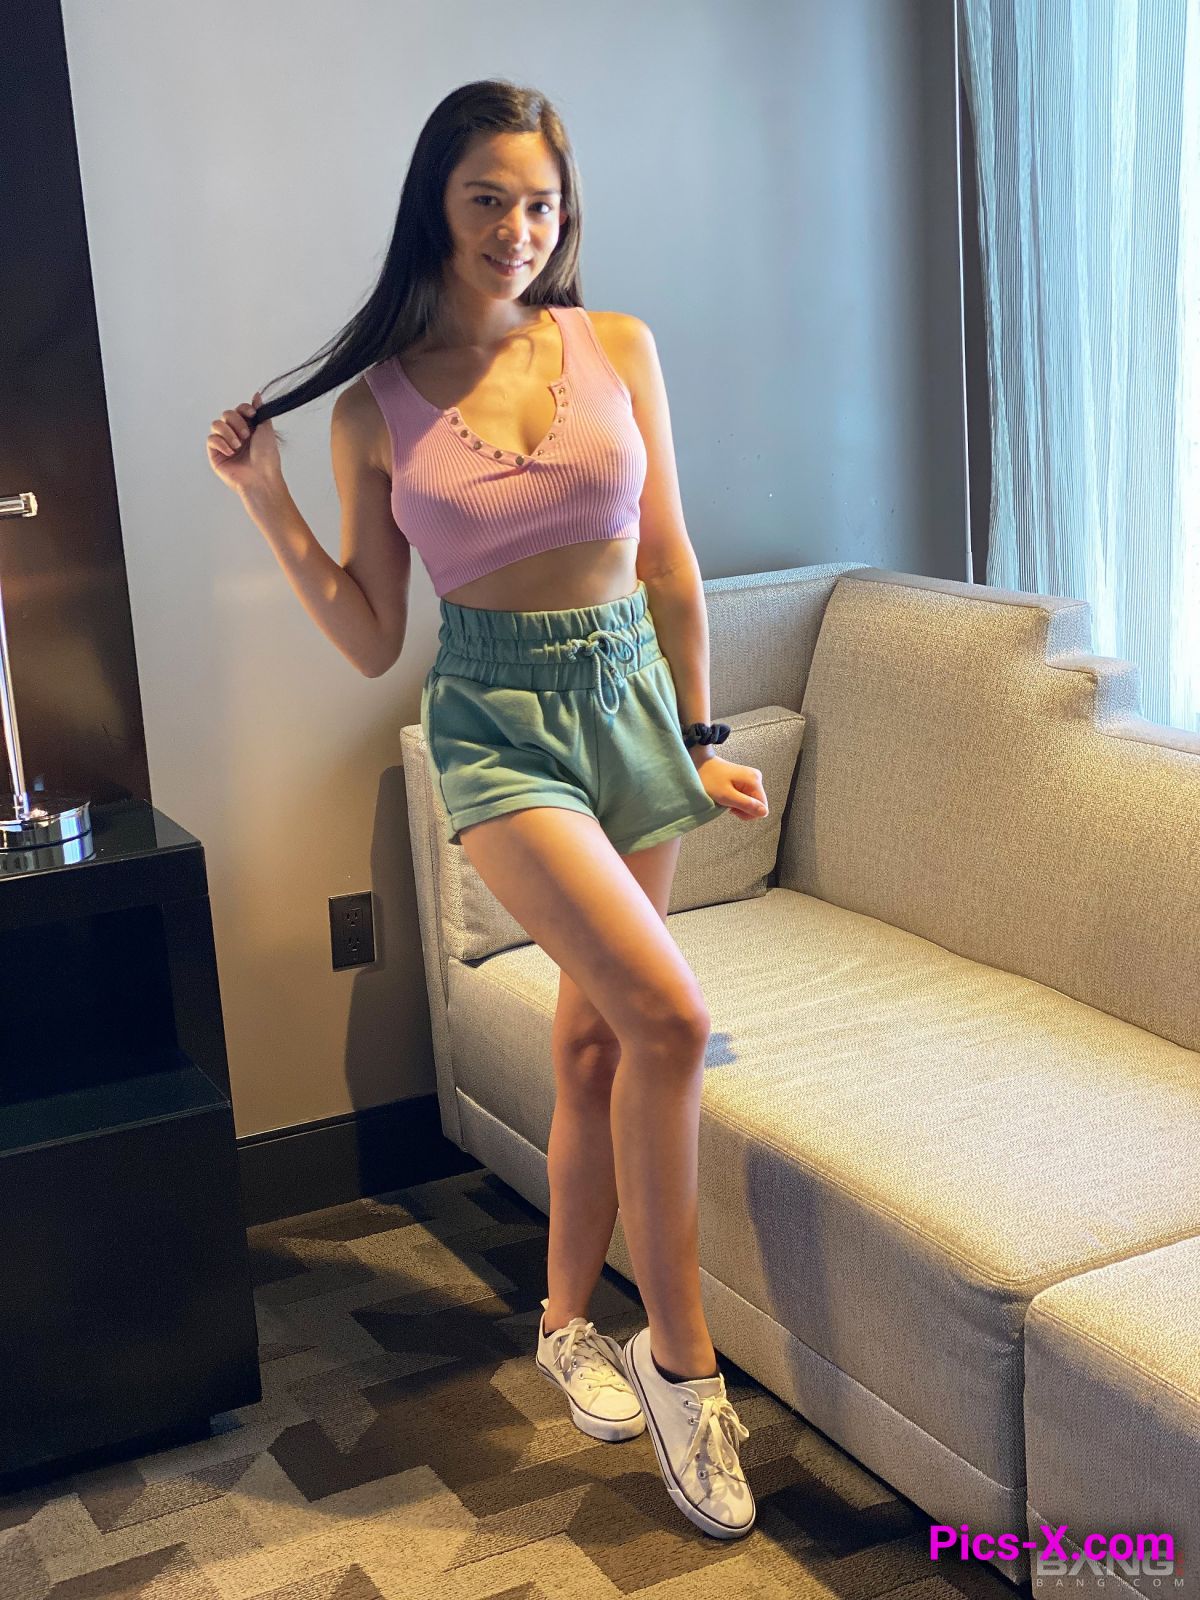 Scarlett Alexis Flashes In Public And Gets Drilled In A Hotel Room - Image 1